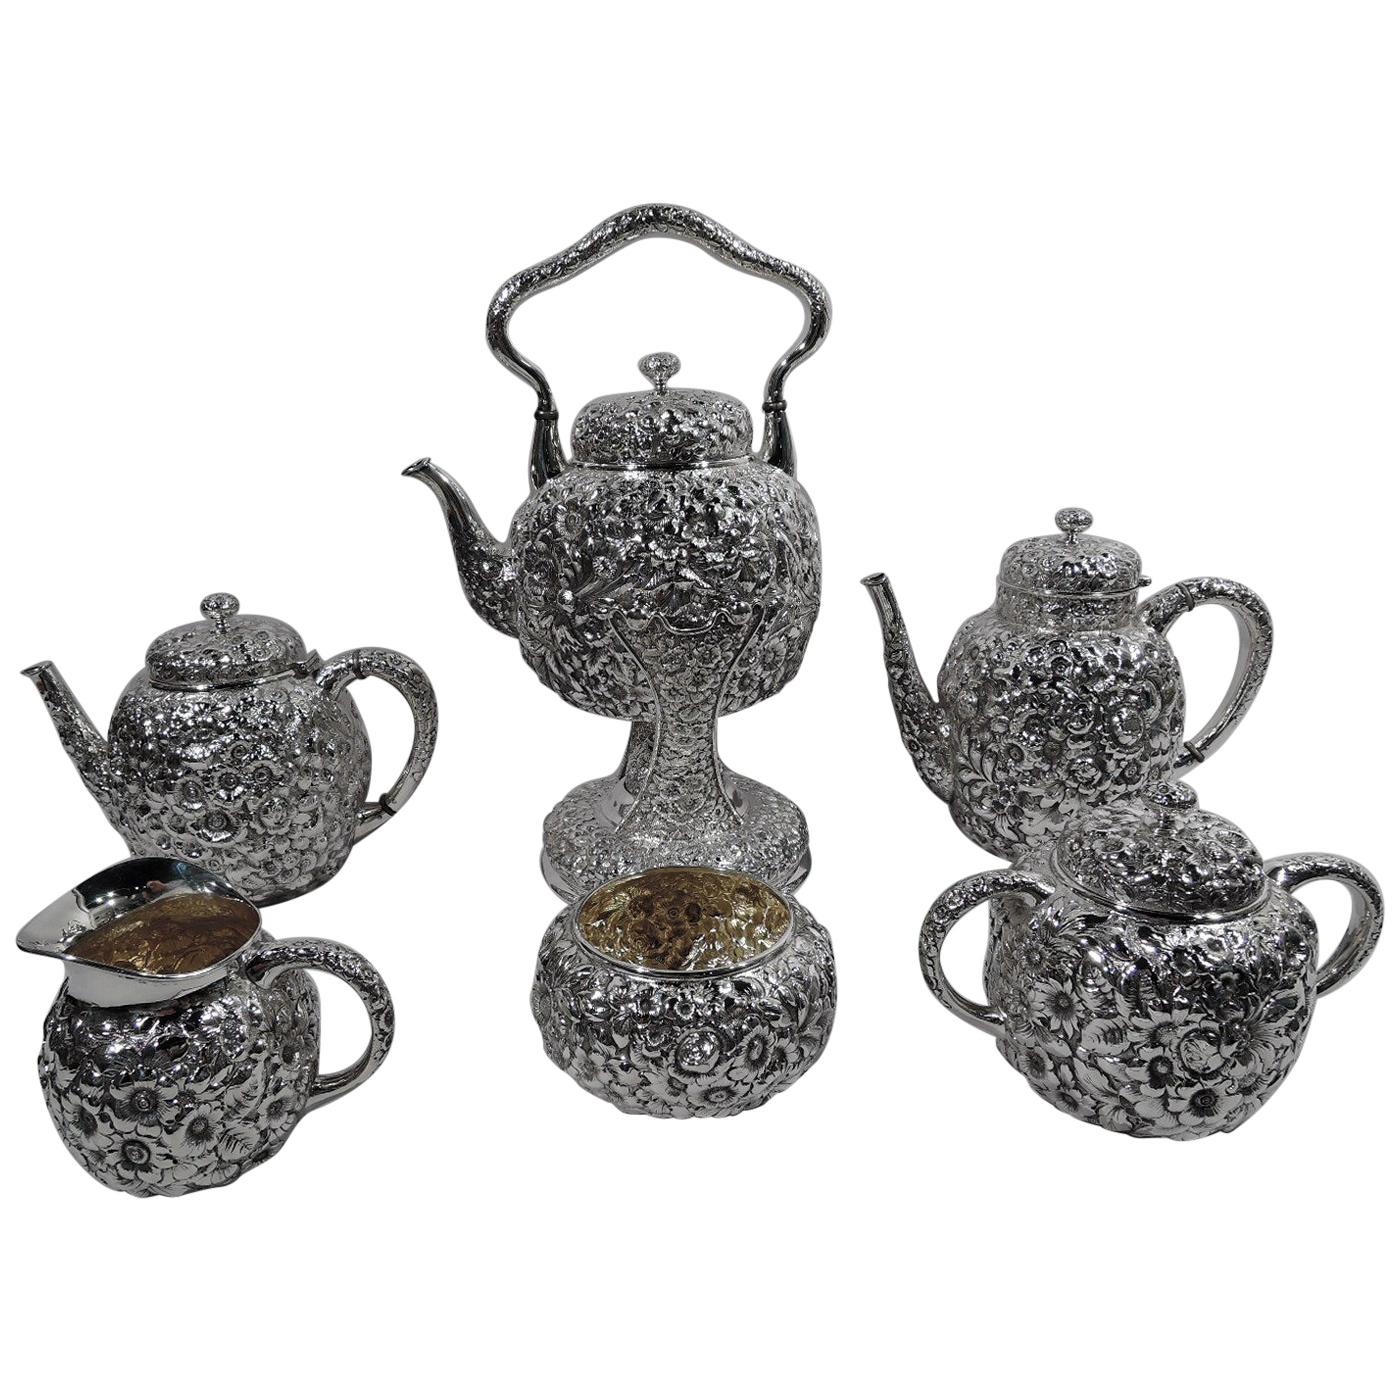 Antique Shiebler Repousse Sterling Silver Coffee and Tea Set